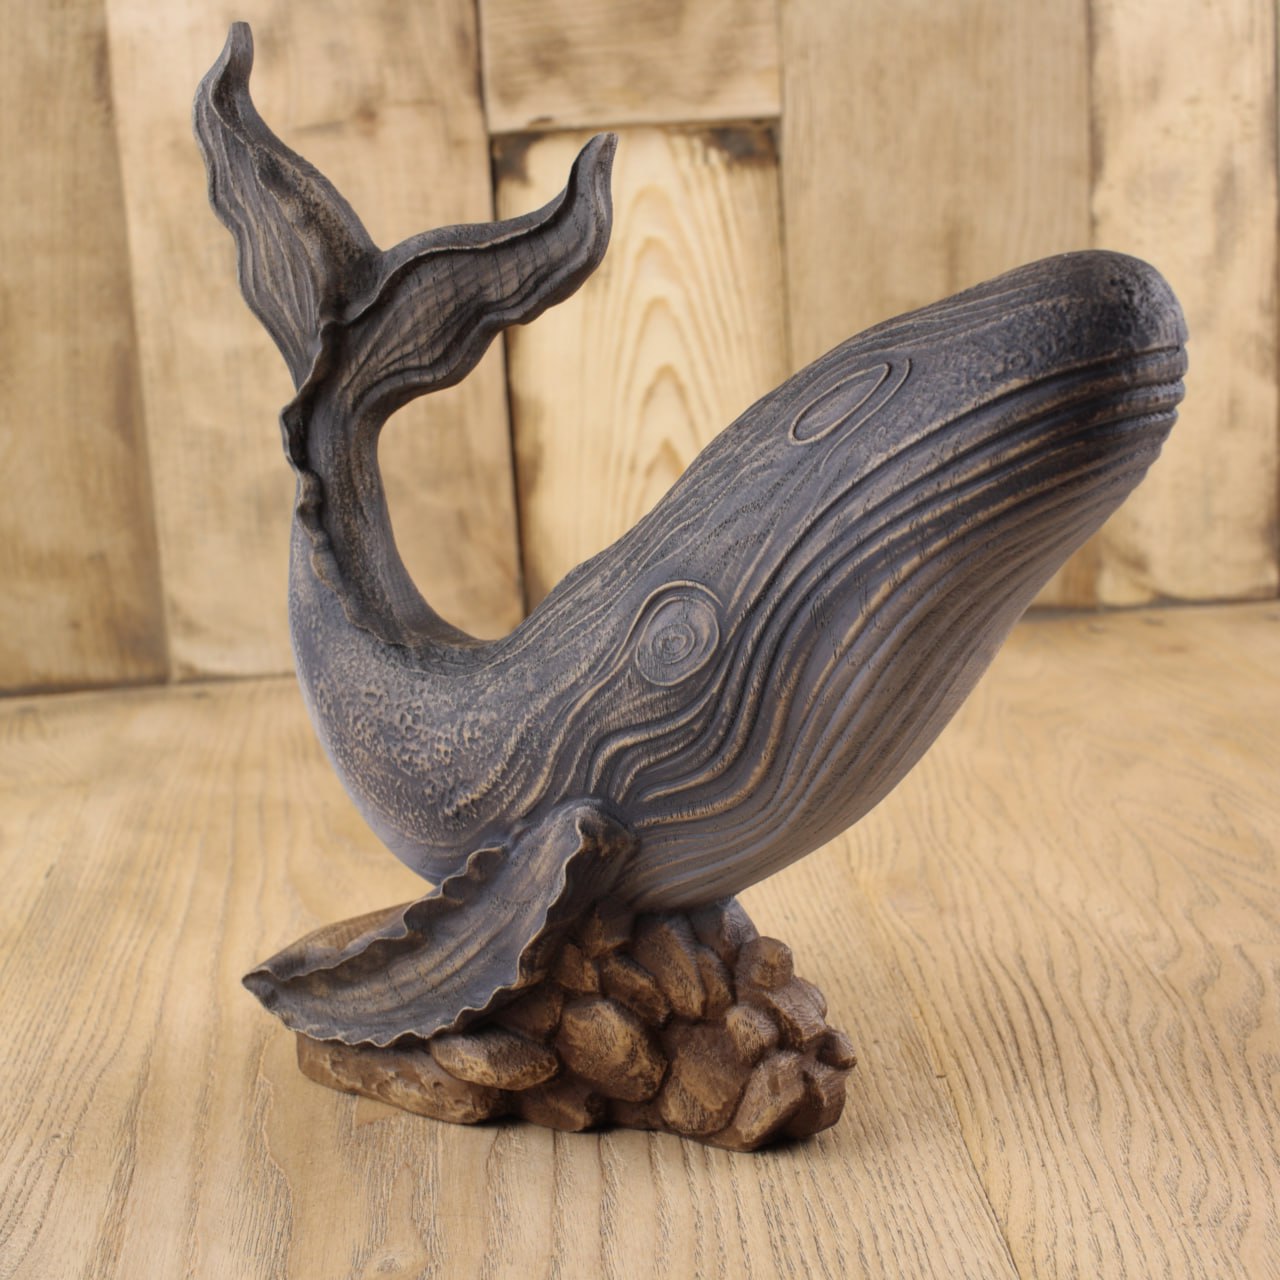 Handcrafted Wooden Whale Sculpture - Capturing the Grace and Magnificence of the Ocean